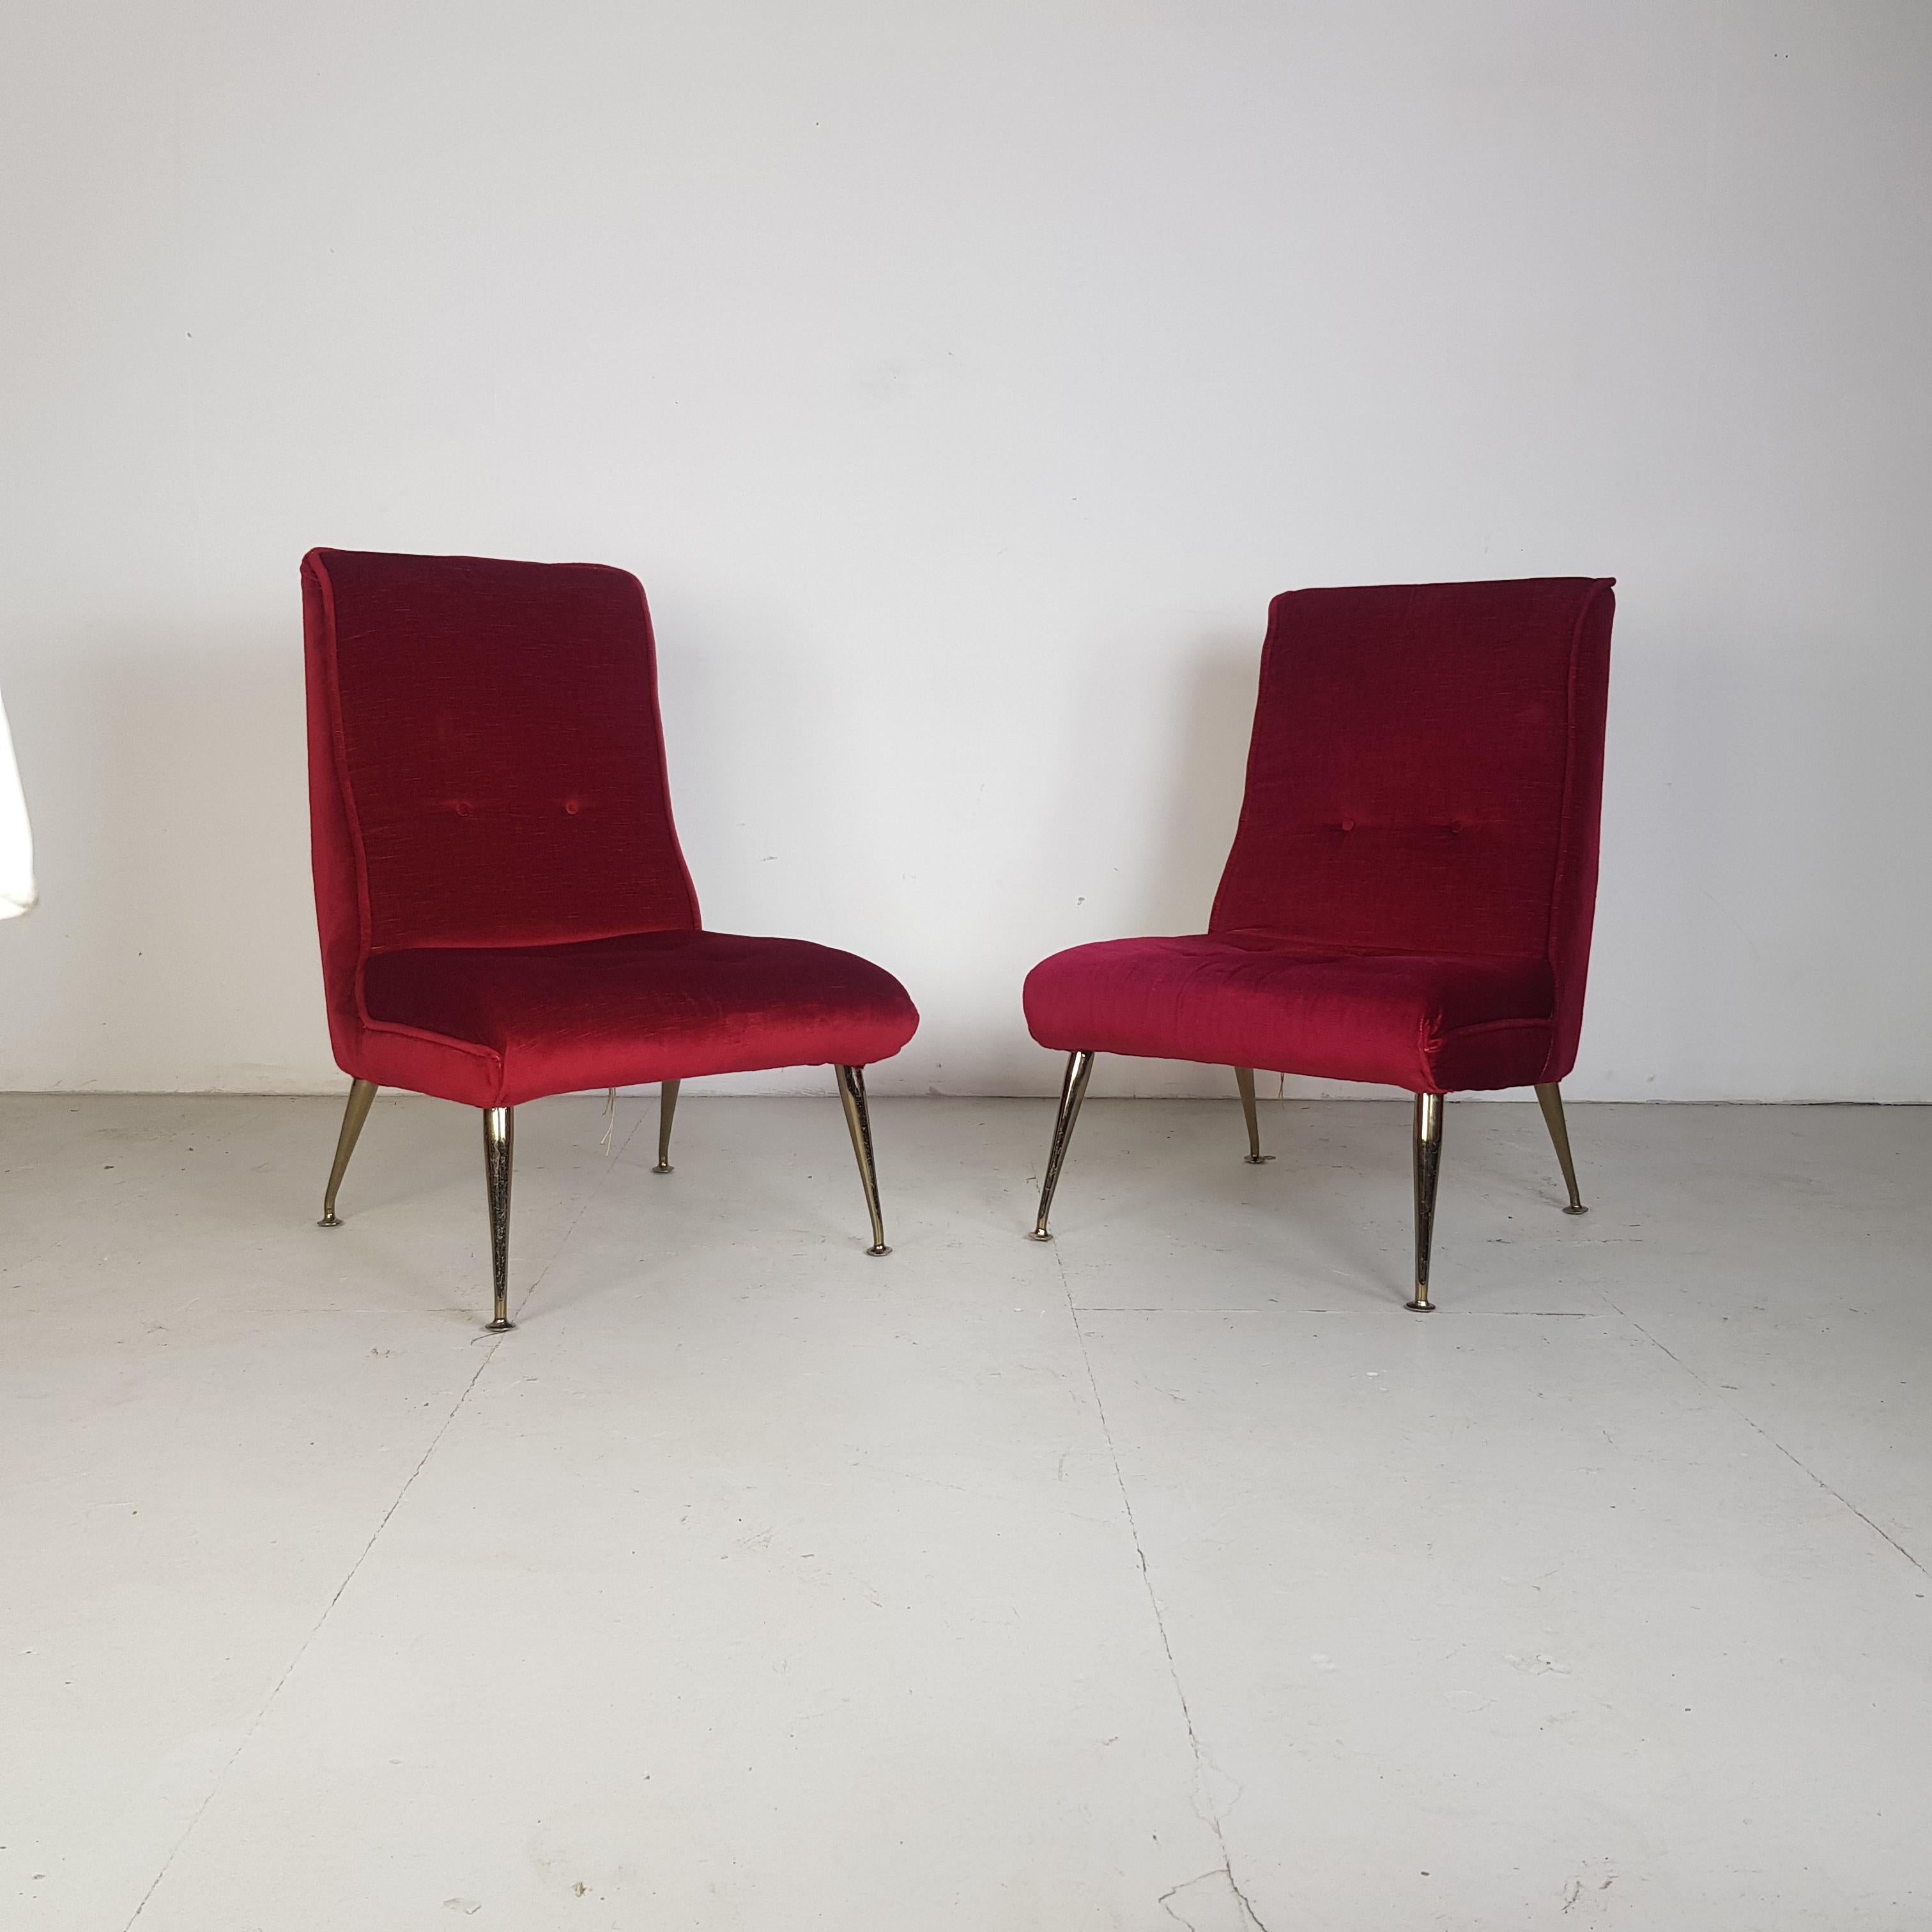 Nice pair of 1950s Italian style cocktail chairs. The upholstery looks to have been reupholstered at some point in red velvet and the feet are brass plated. In good vintage condition.

Approximate dimensions:

Height 82cm

Width 47cm

Depth